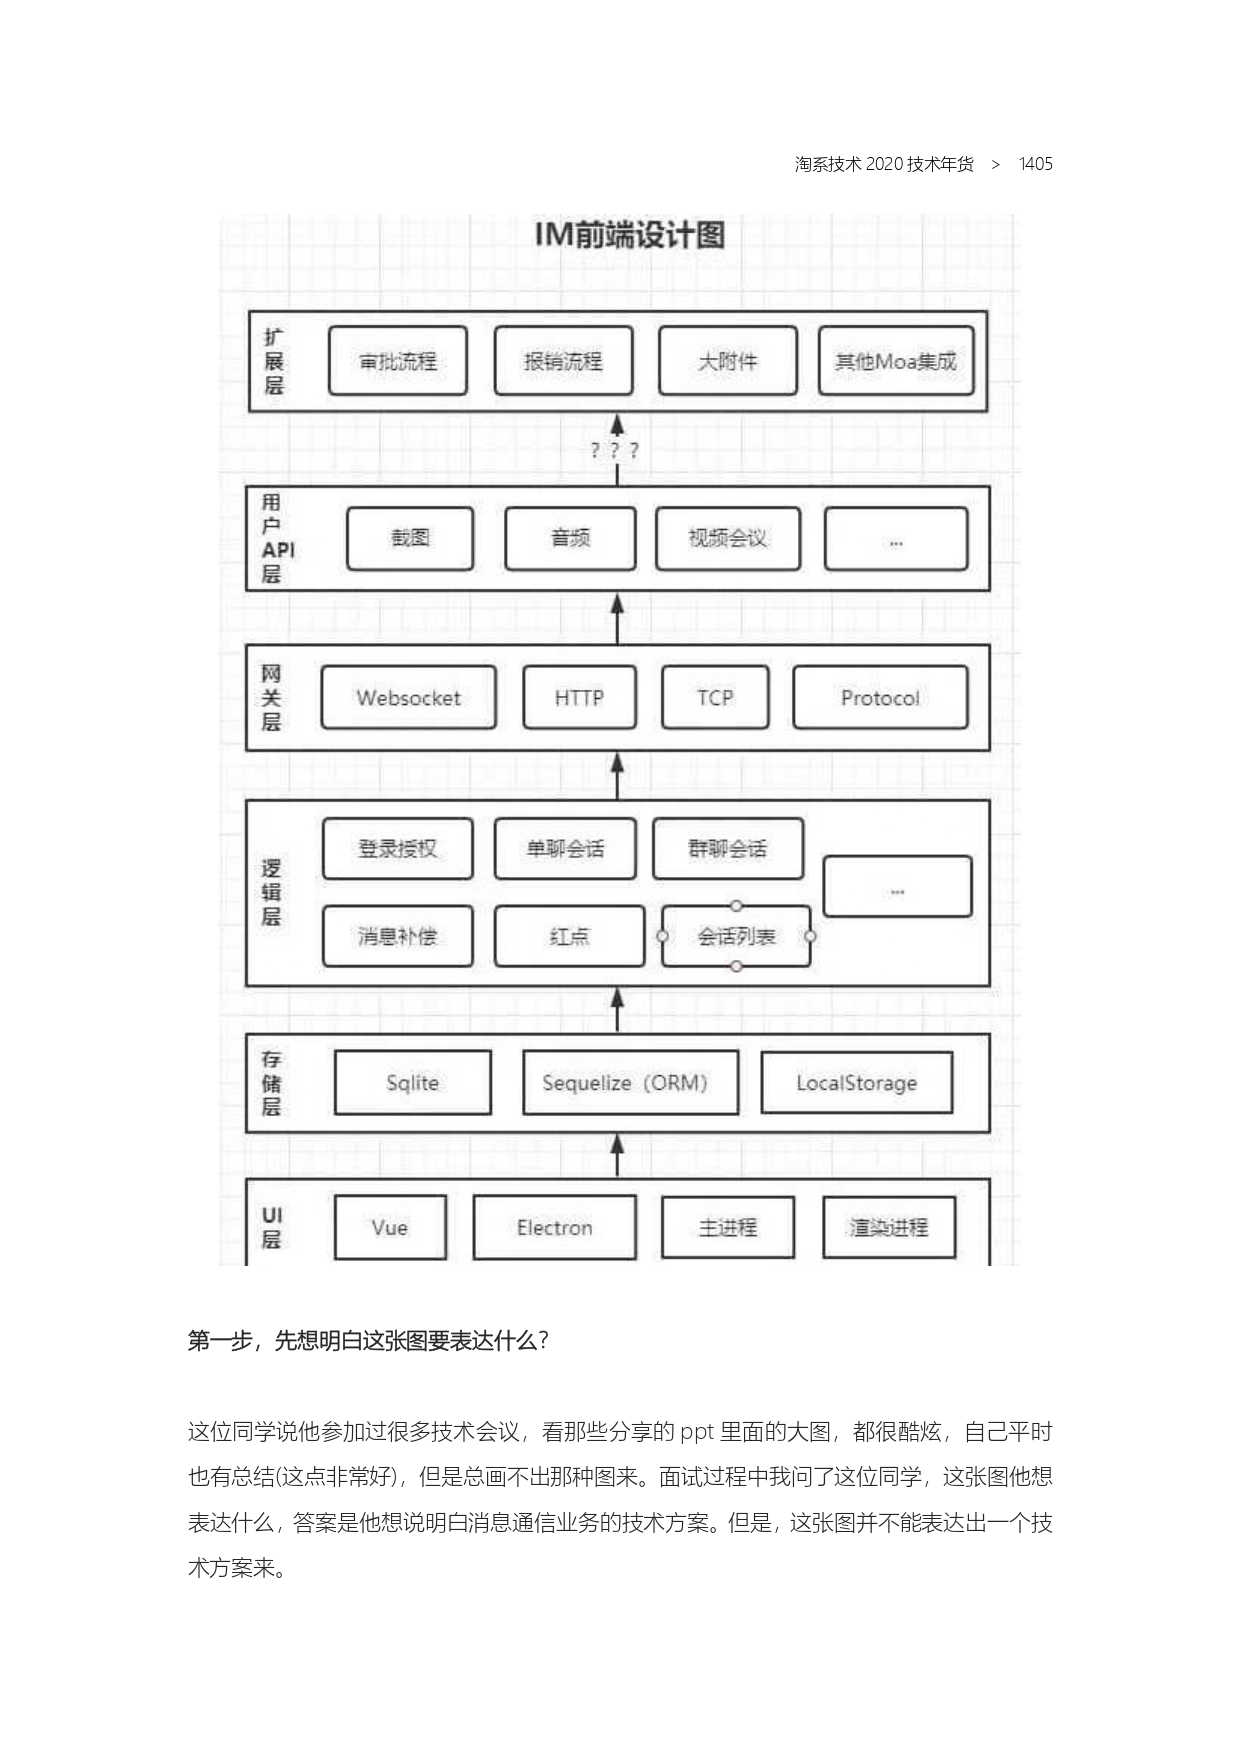 The Complete Works of Tao Technology 2020-1313-1671-1-195_page-0093.jpg